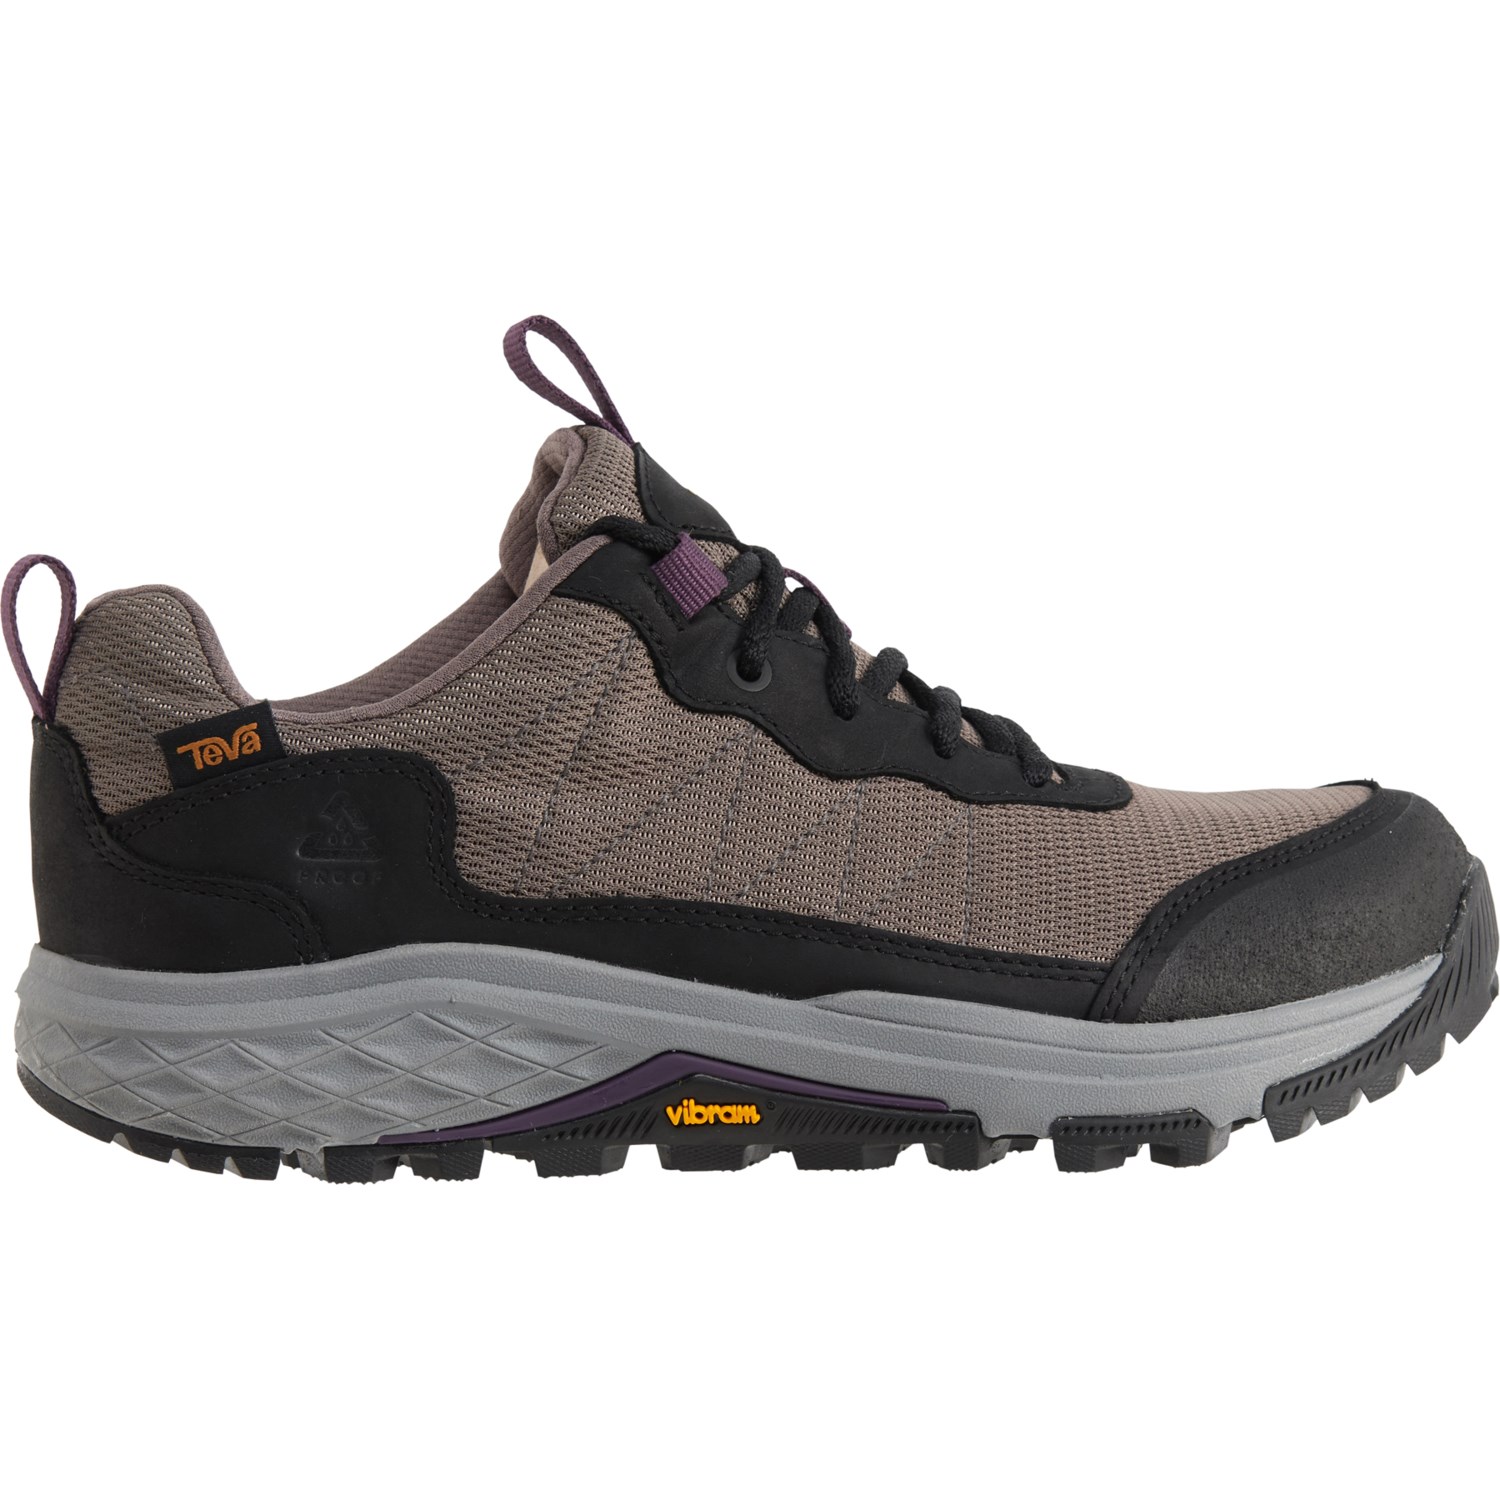 Teva Ridgeview RAPID PROOF Low Hiking Shoes (For Women) - Save 70%